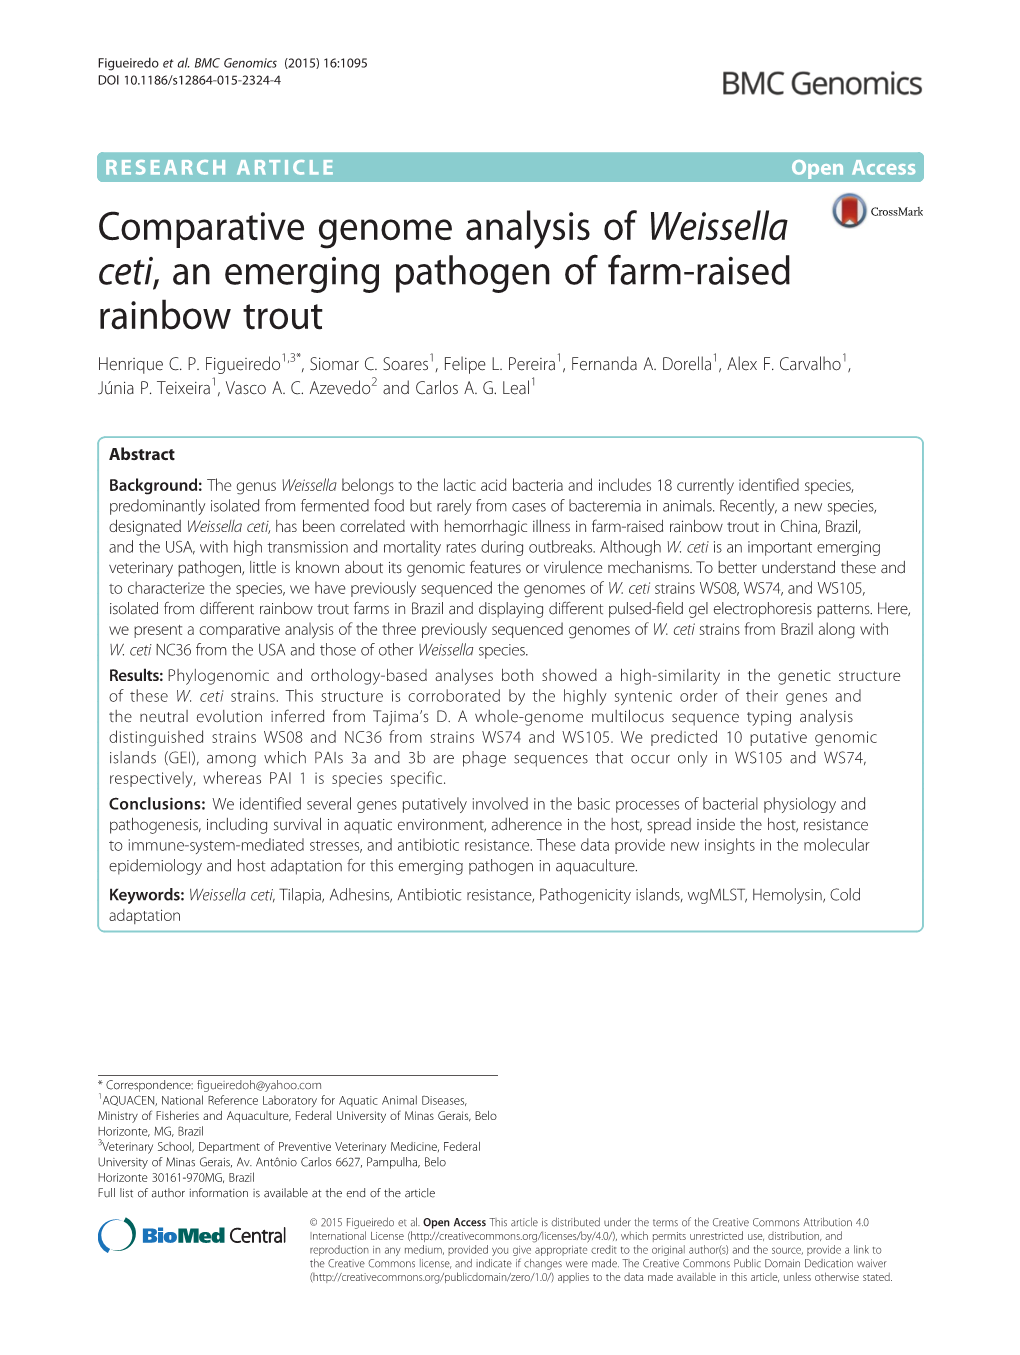 Comparative Genome Analysis of Weissella Ceti, an Emerging Pathogen of Farm-Raised Rainbow Trout Henrique C